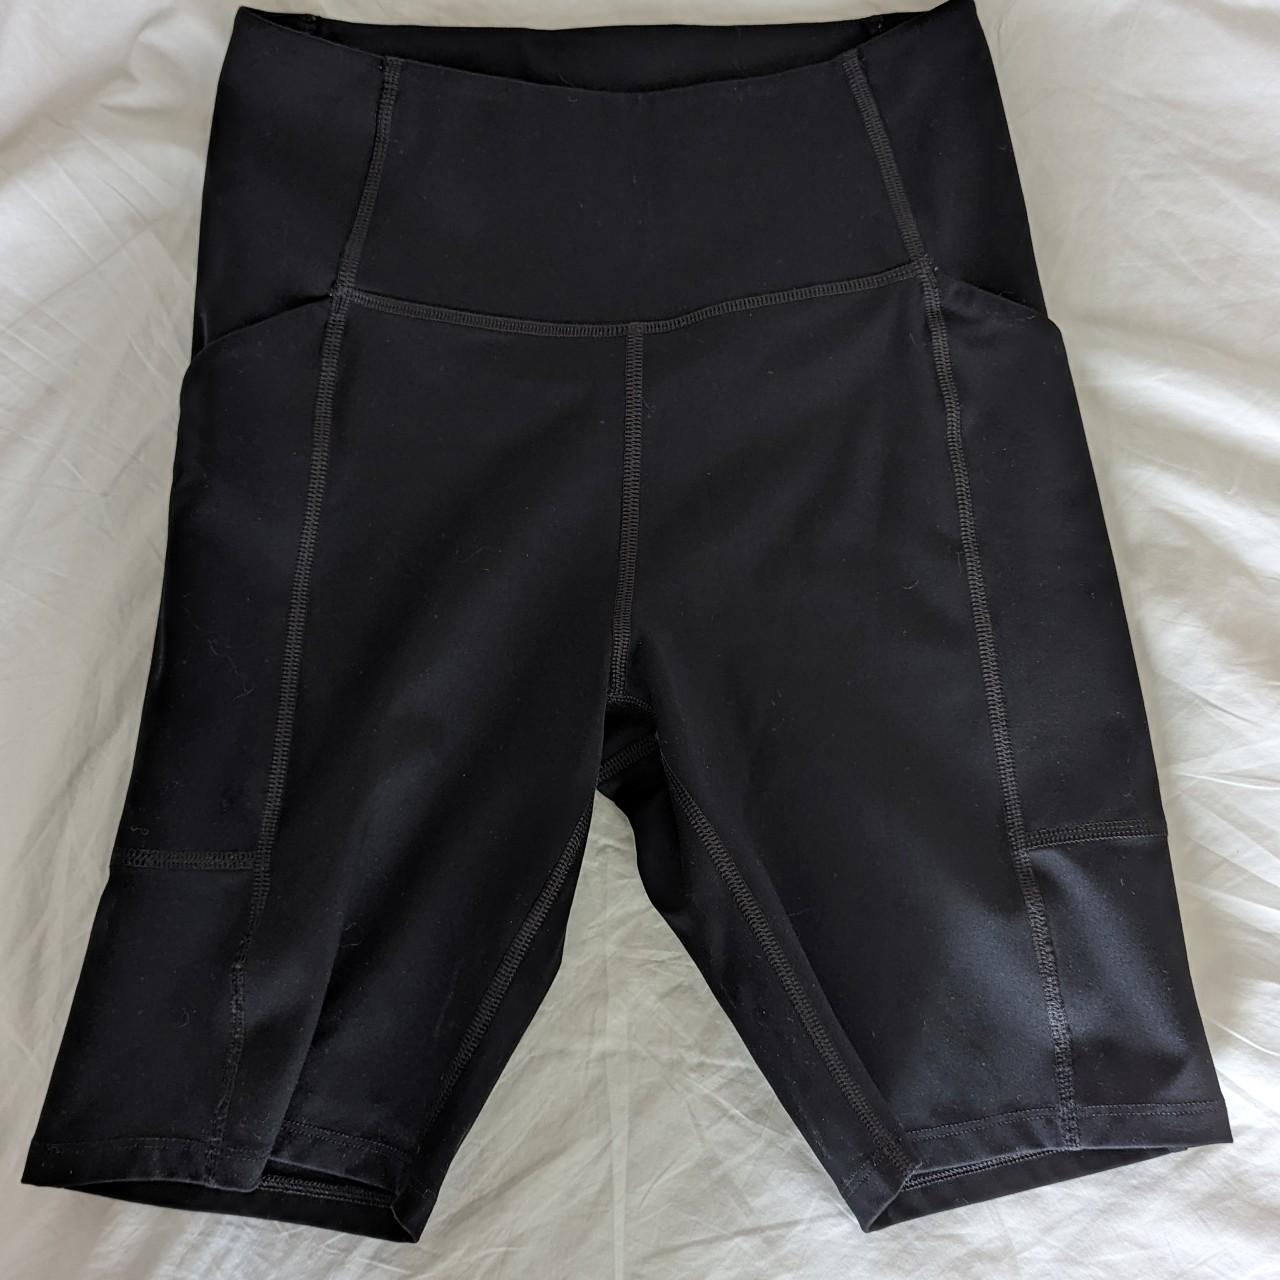 WOMEN'S SHORTS WITH RECYCLED GRAY LYCRA